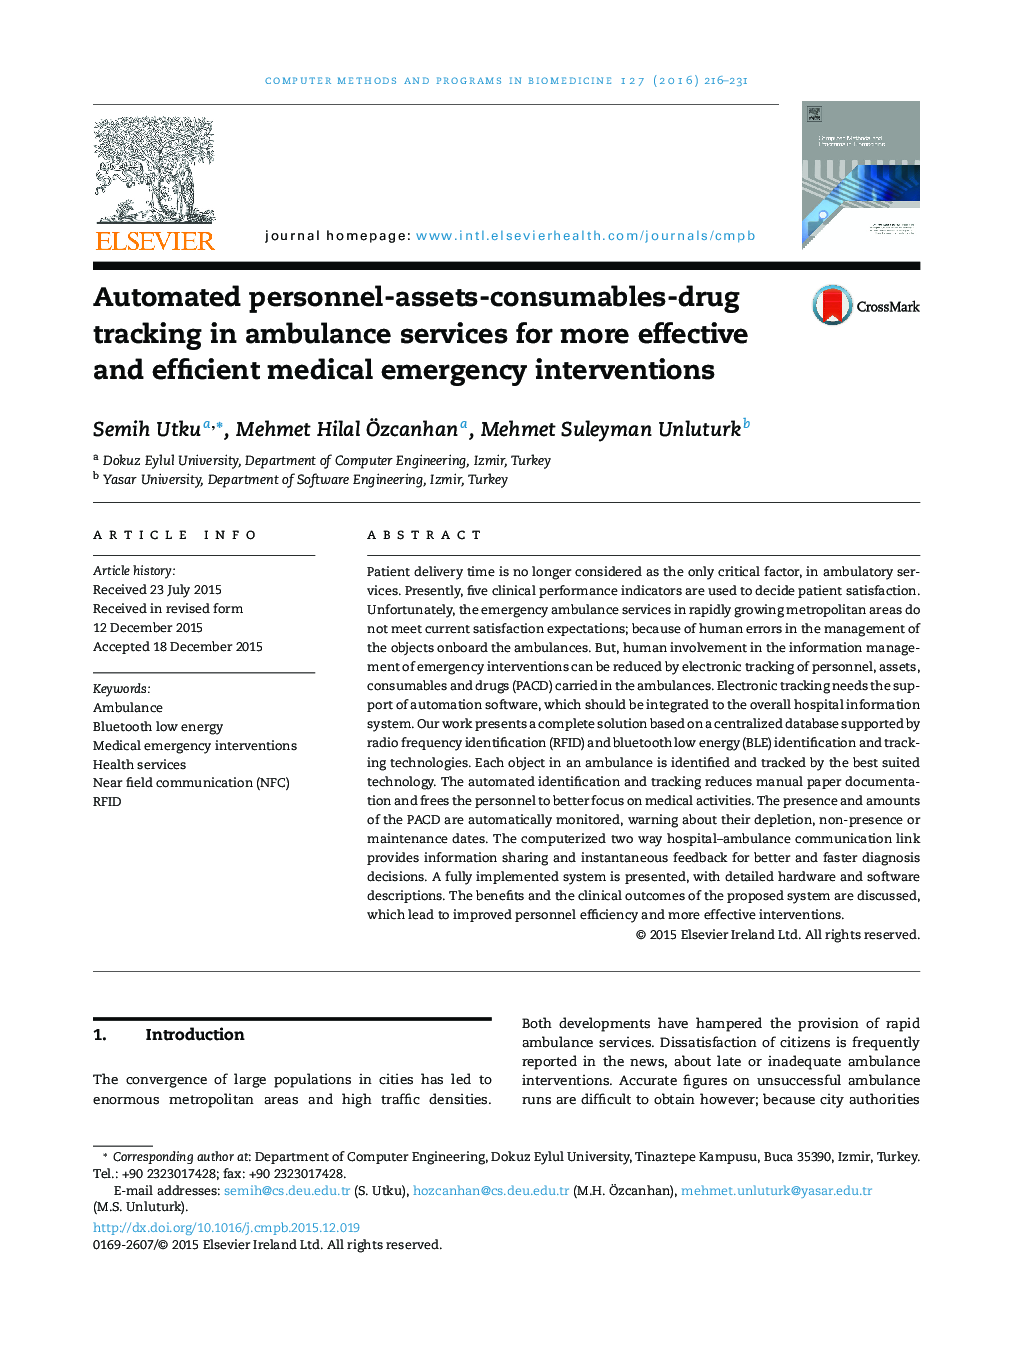 Automated personnel-assets-consumables-drug tracking in ambulance services for more effective and efficient medical emergency interventions